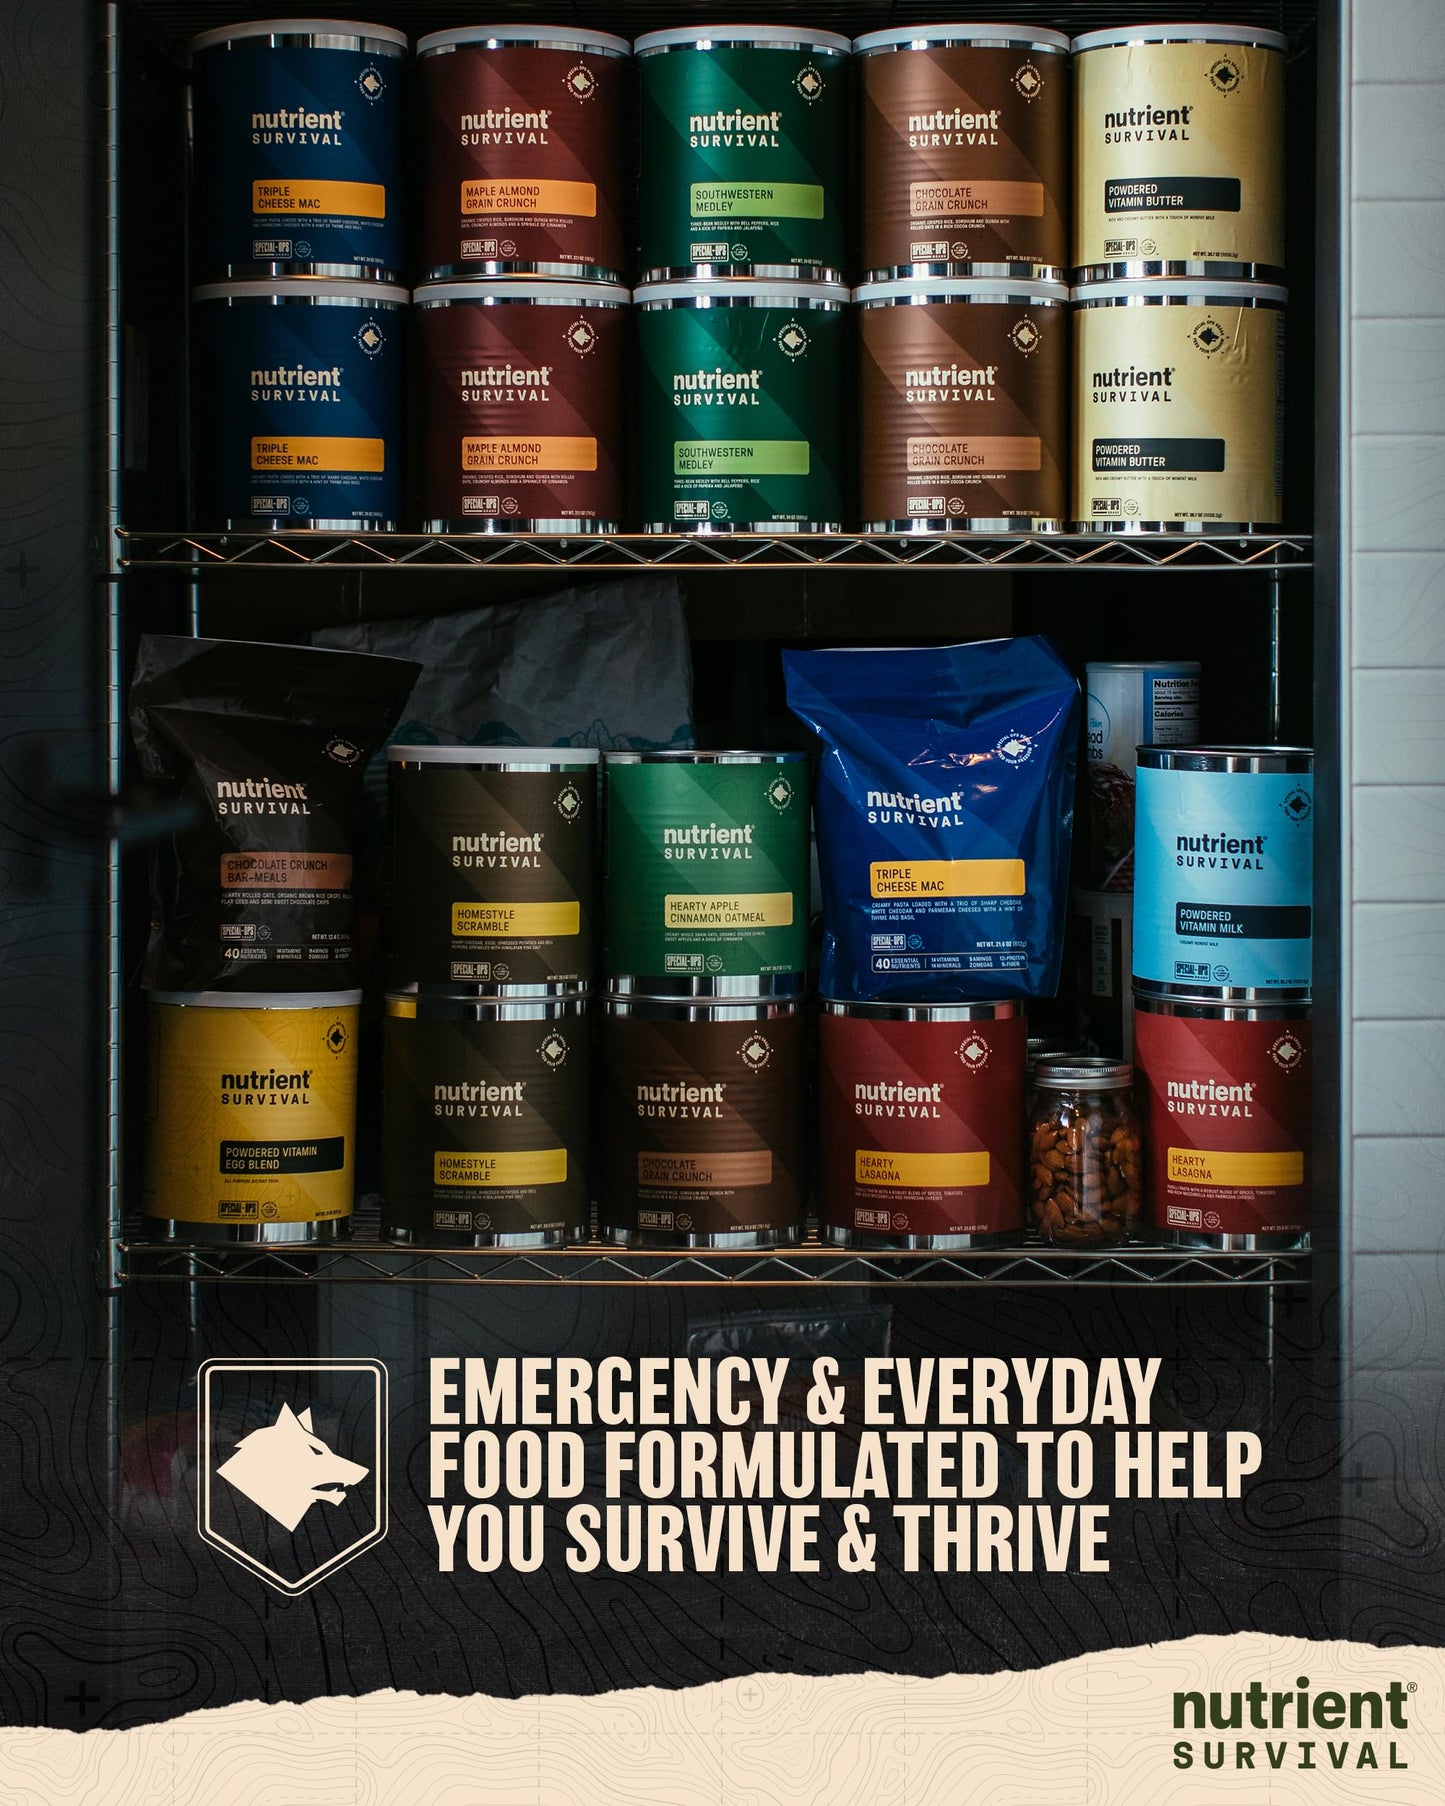 Nutrient Survival MRE Emergency Food Supply, 14-Day Survival Food (72 Servings) Bucket Disaster Kit, Freeze Dried Ready to Eat Meals in Resealable Packs, Shelf Stable up to 15 Years